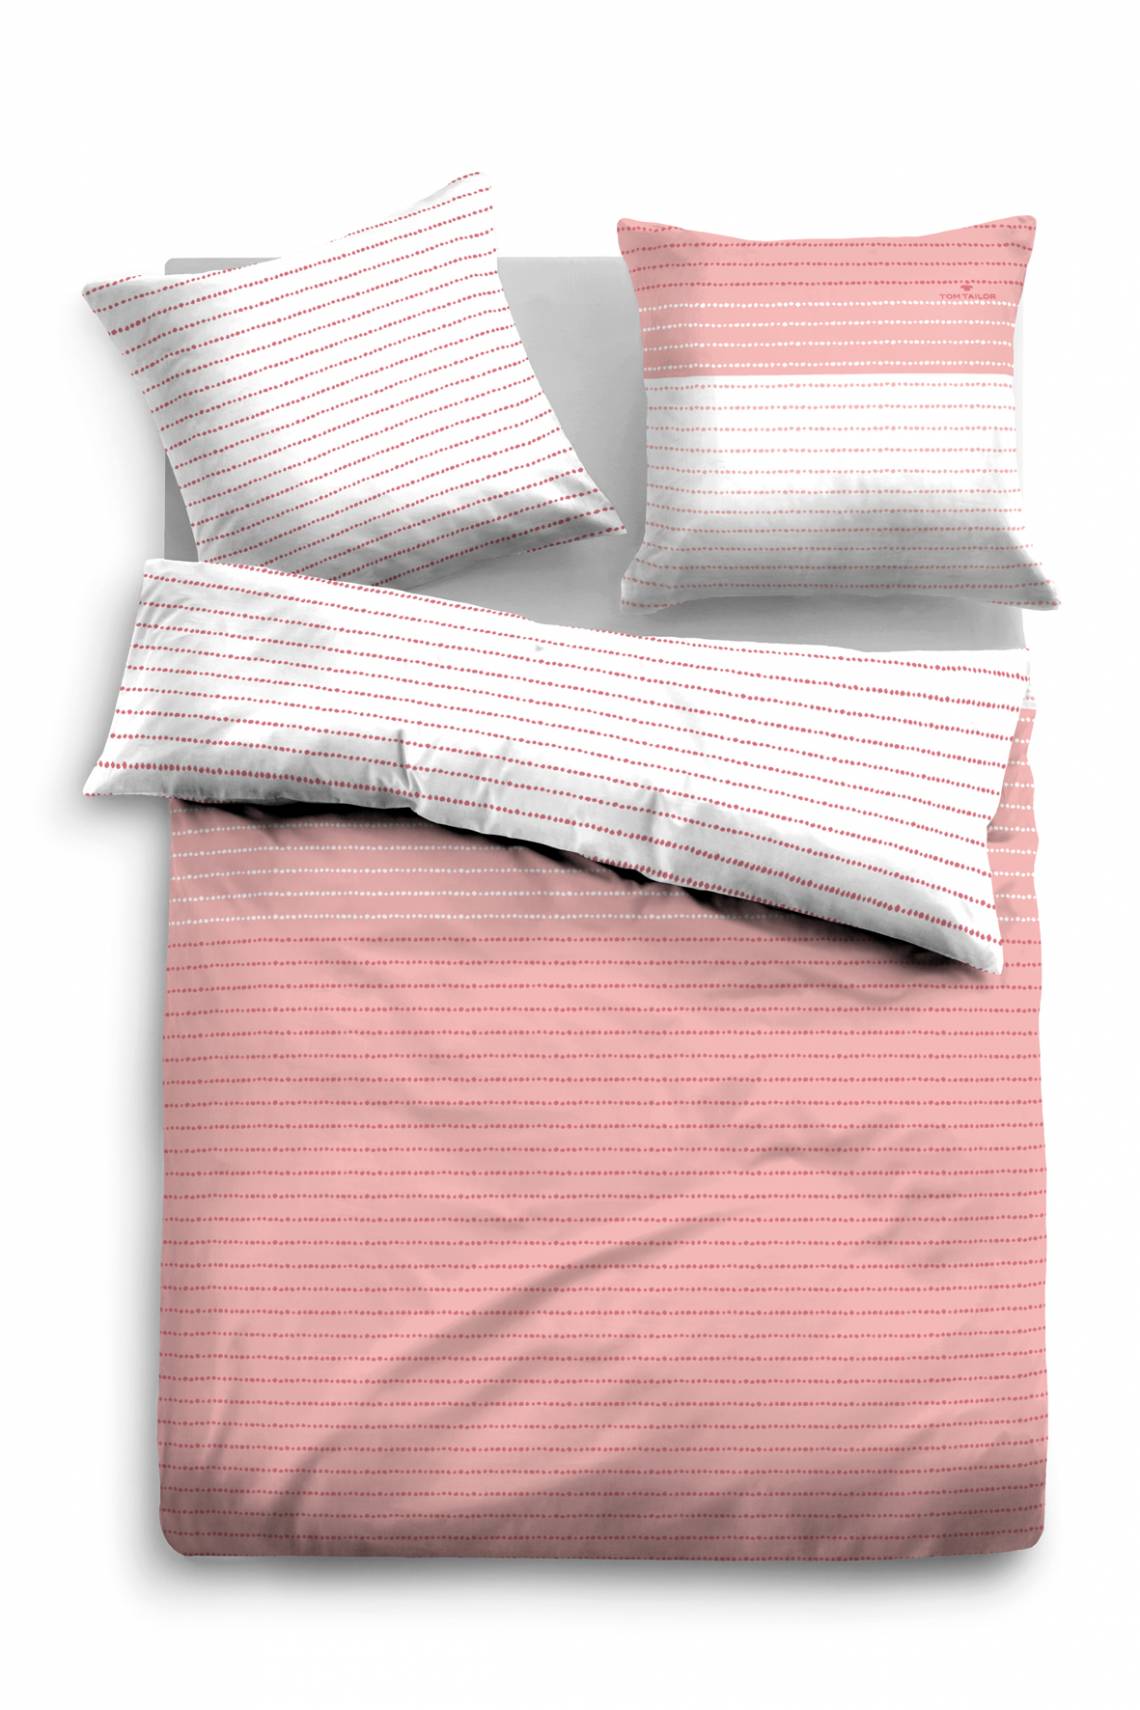 TOM TAILOR - Pure Pastels SATIN BED LINEN - 69902 / 841 